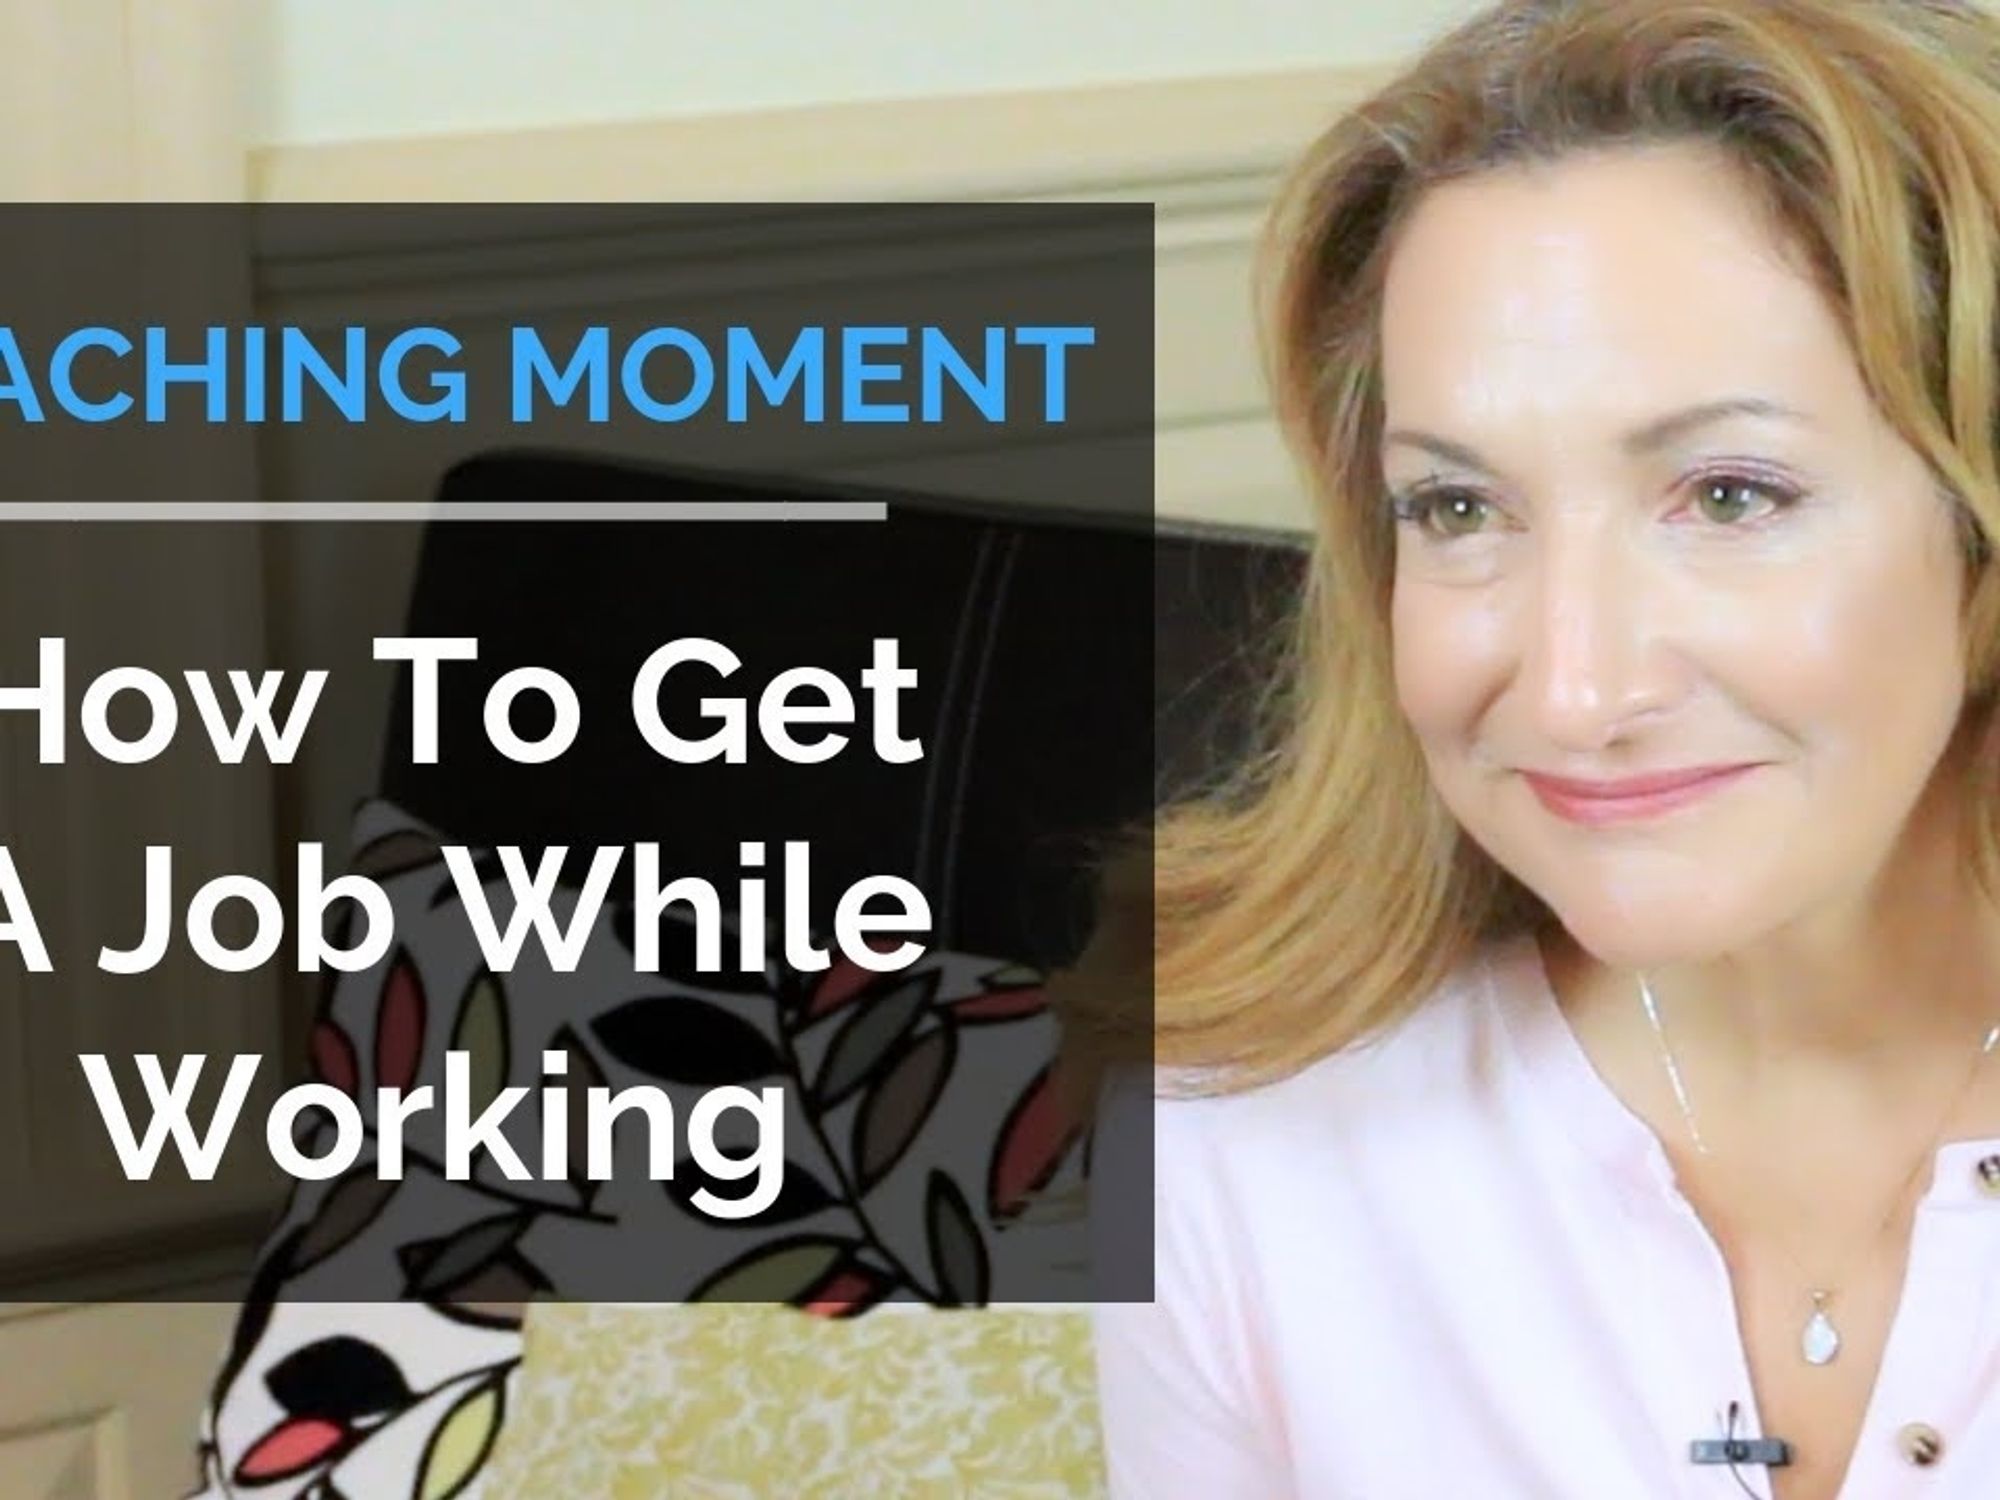 4 Things To Do: Getting A New Job While Working